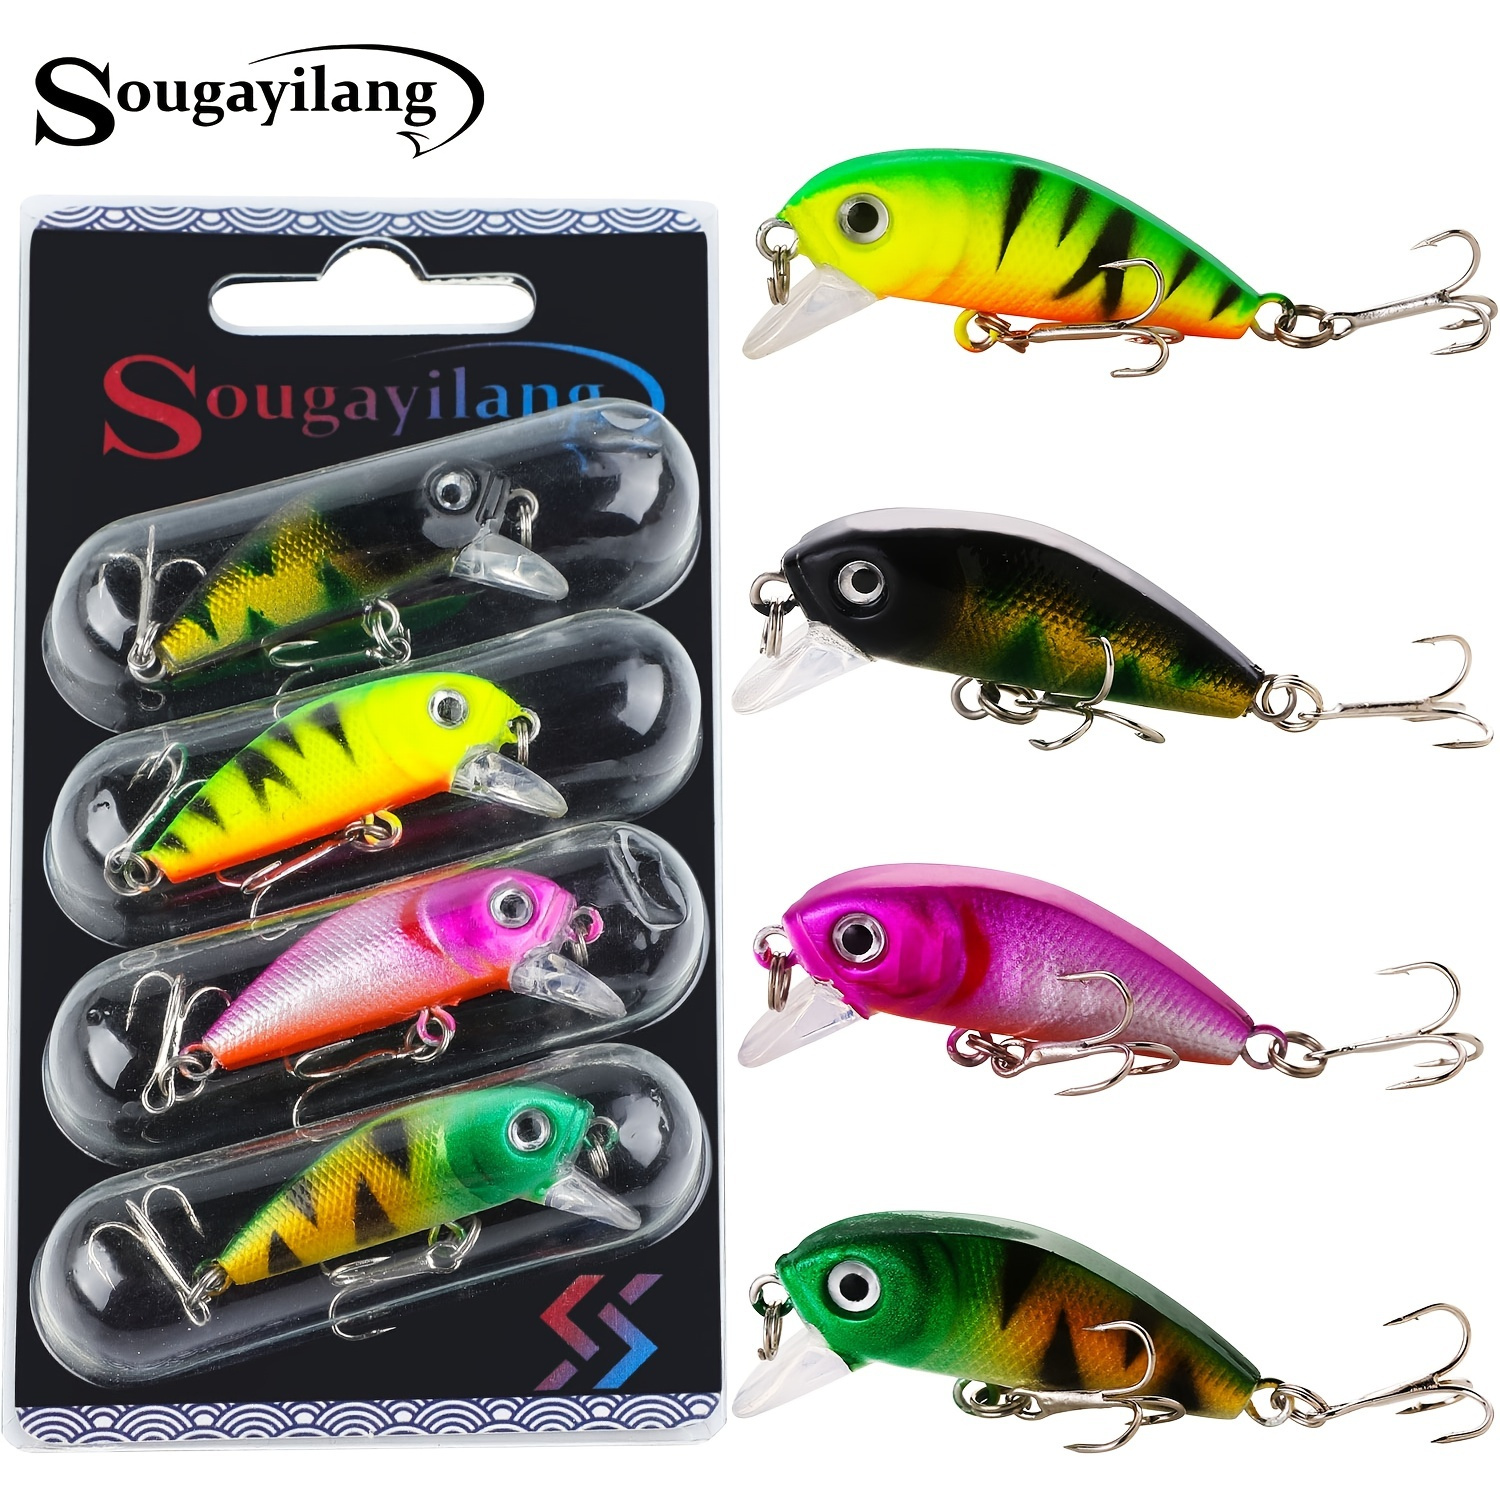 

4pcs Sougayilang Crankbait Fishing Lures - Catch More Fish With These Tackle Baits!